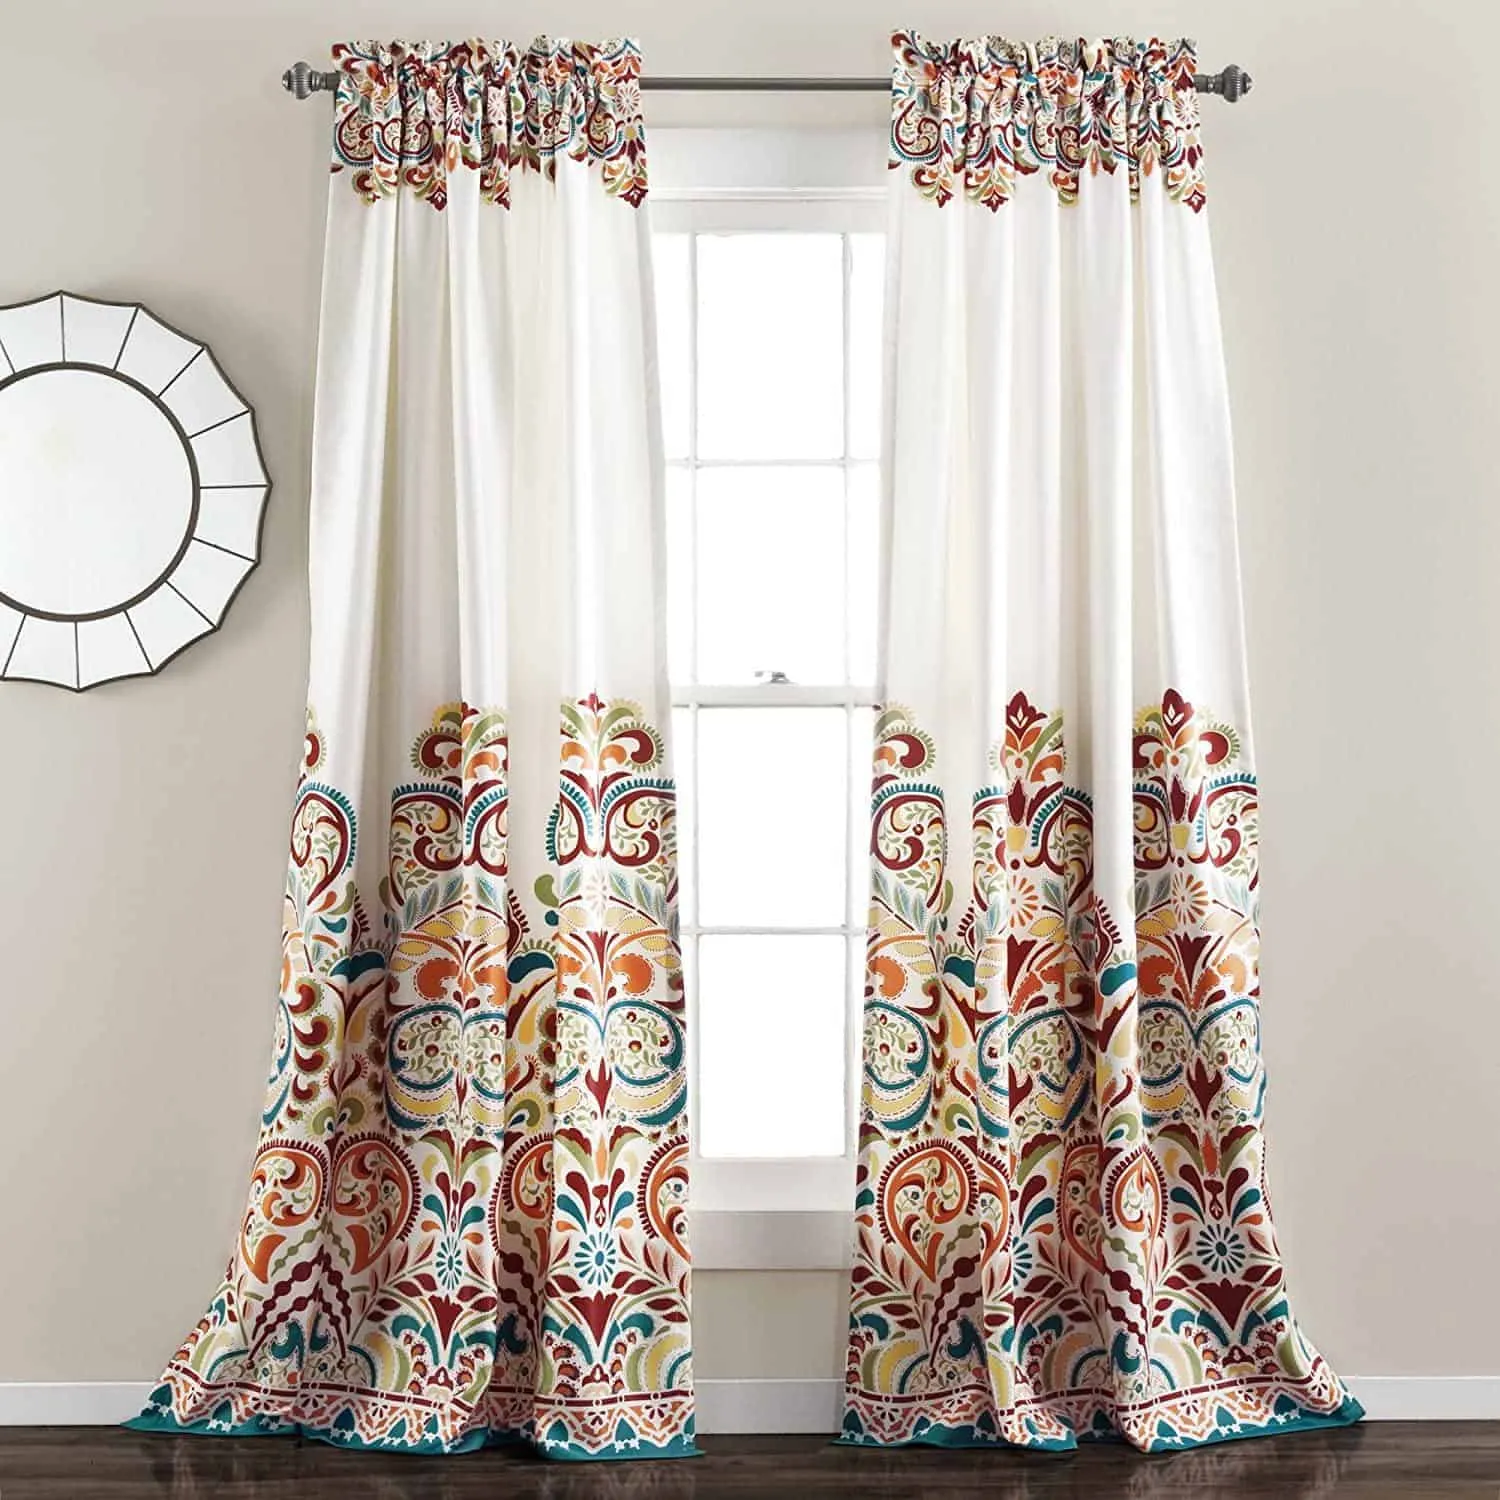 Boarder printed white curtain